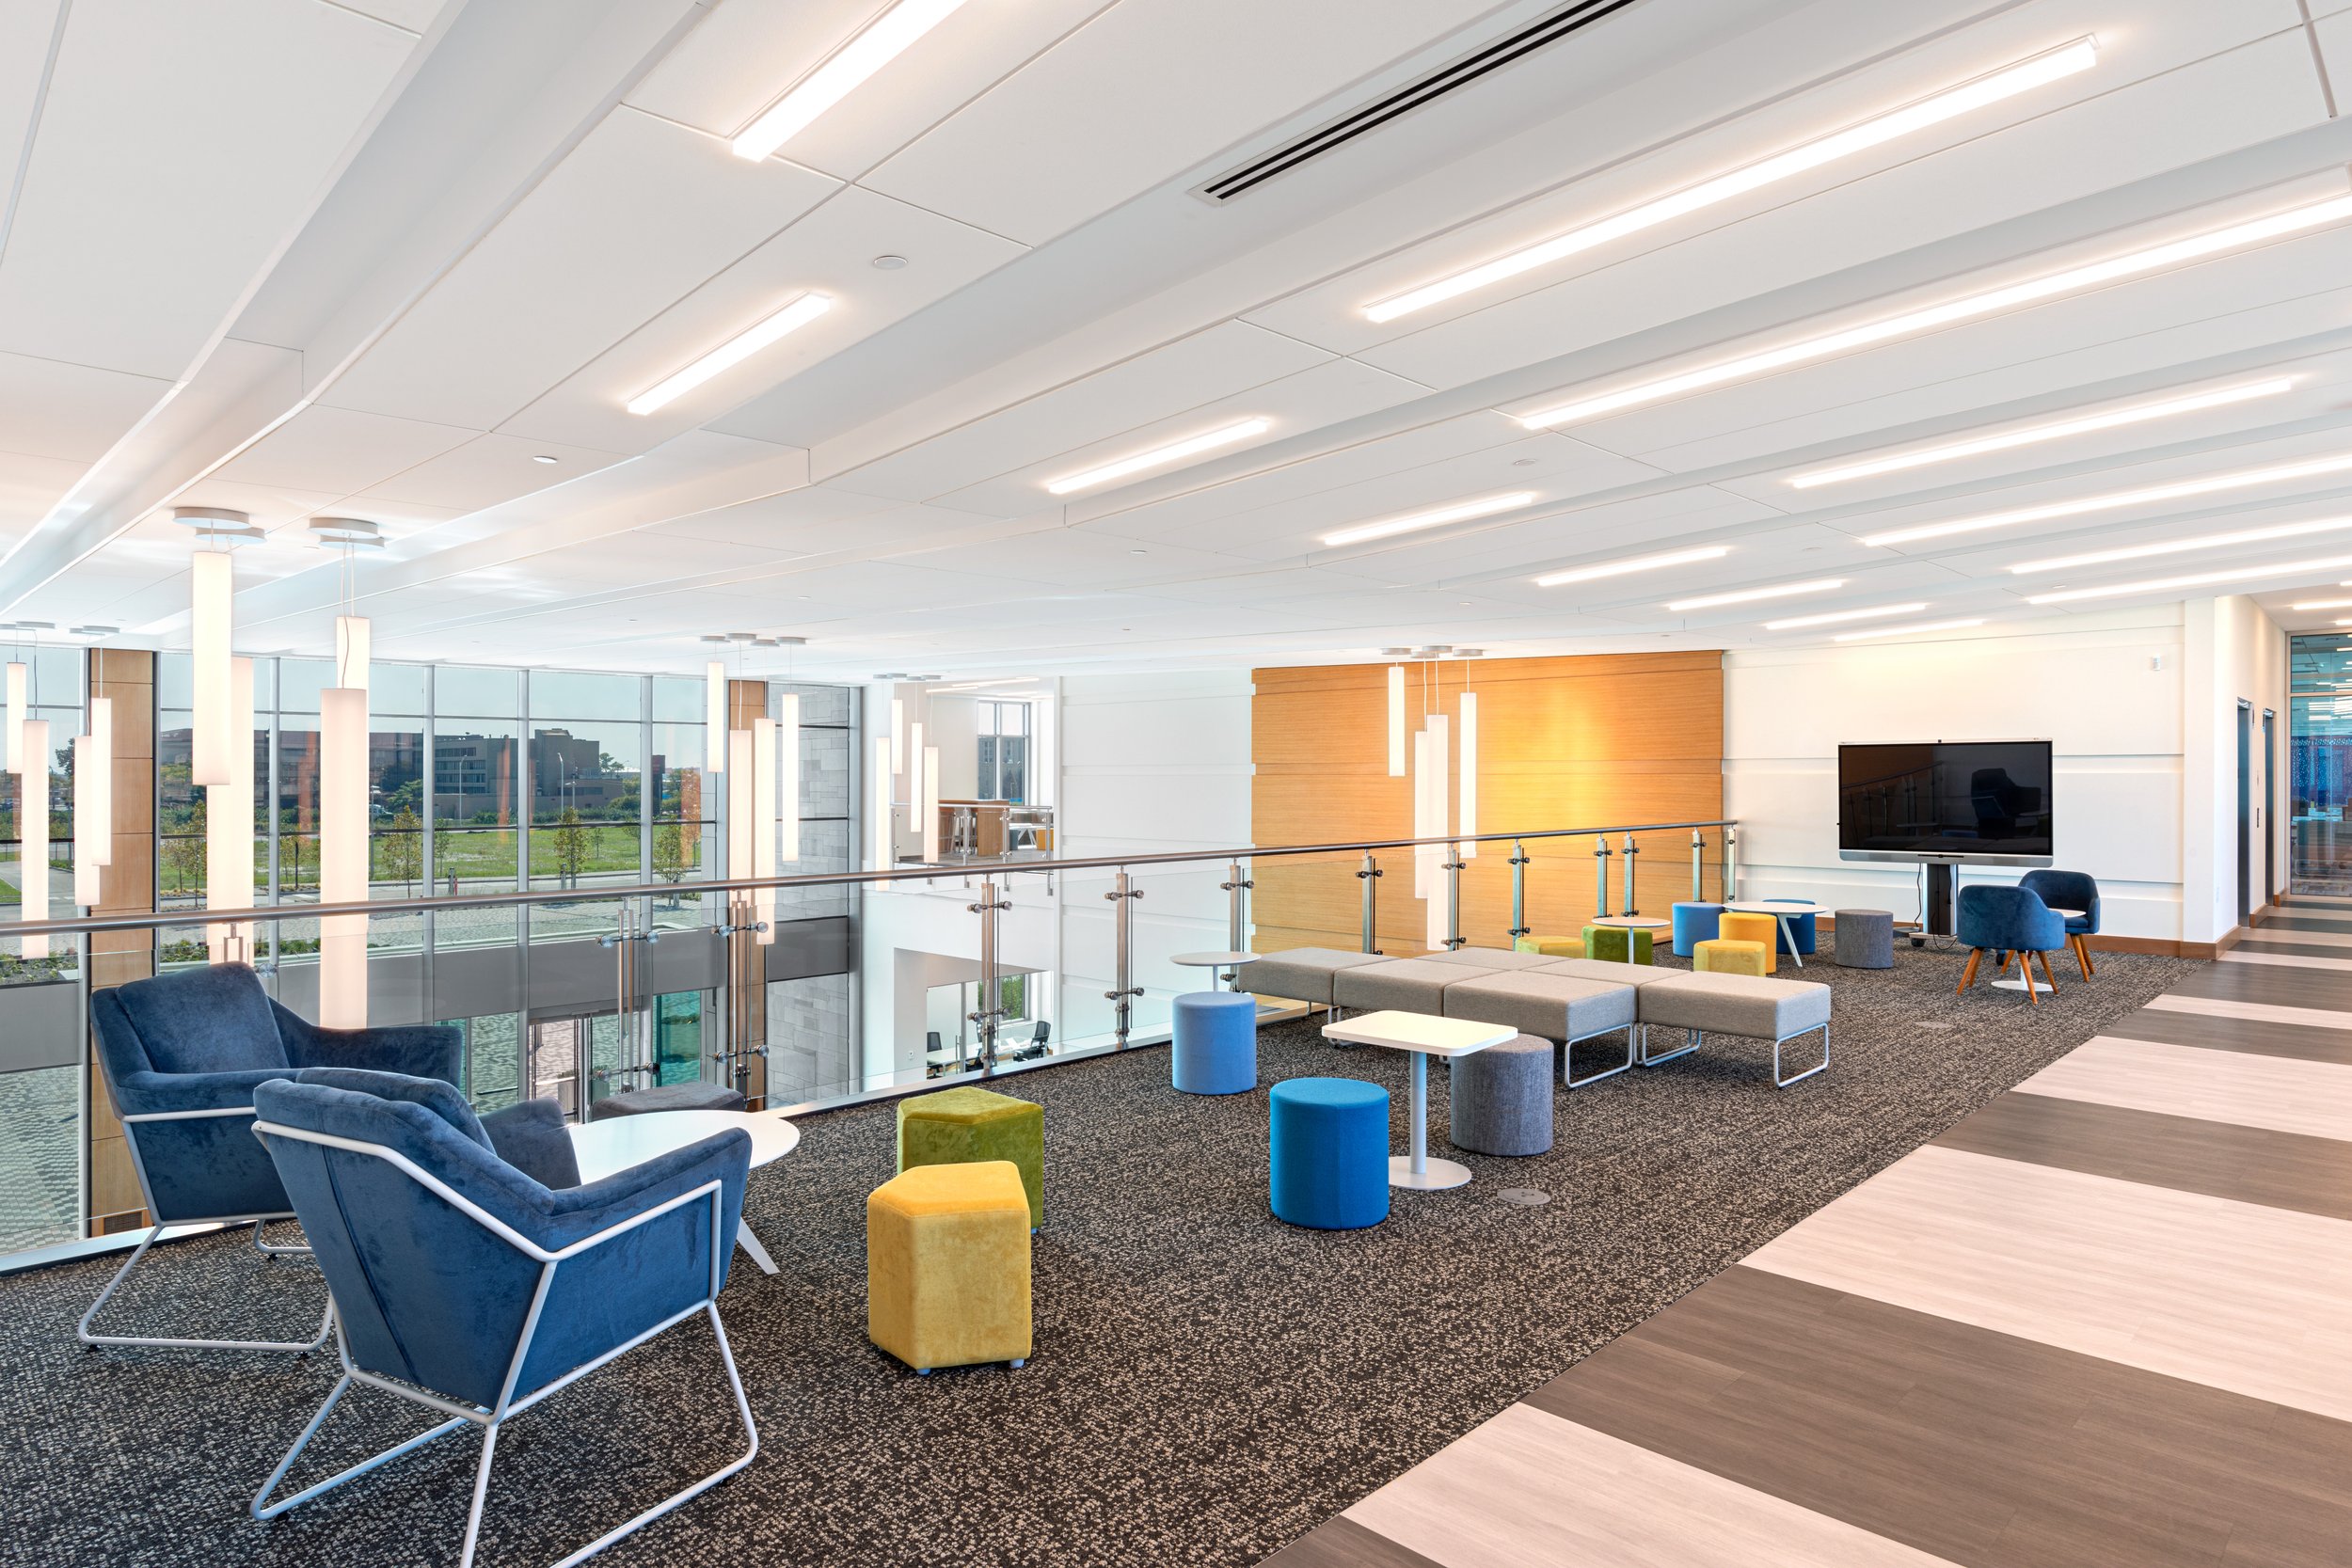 Interior photography of a reception hall in a corporate building.